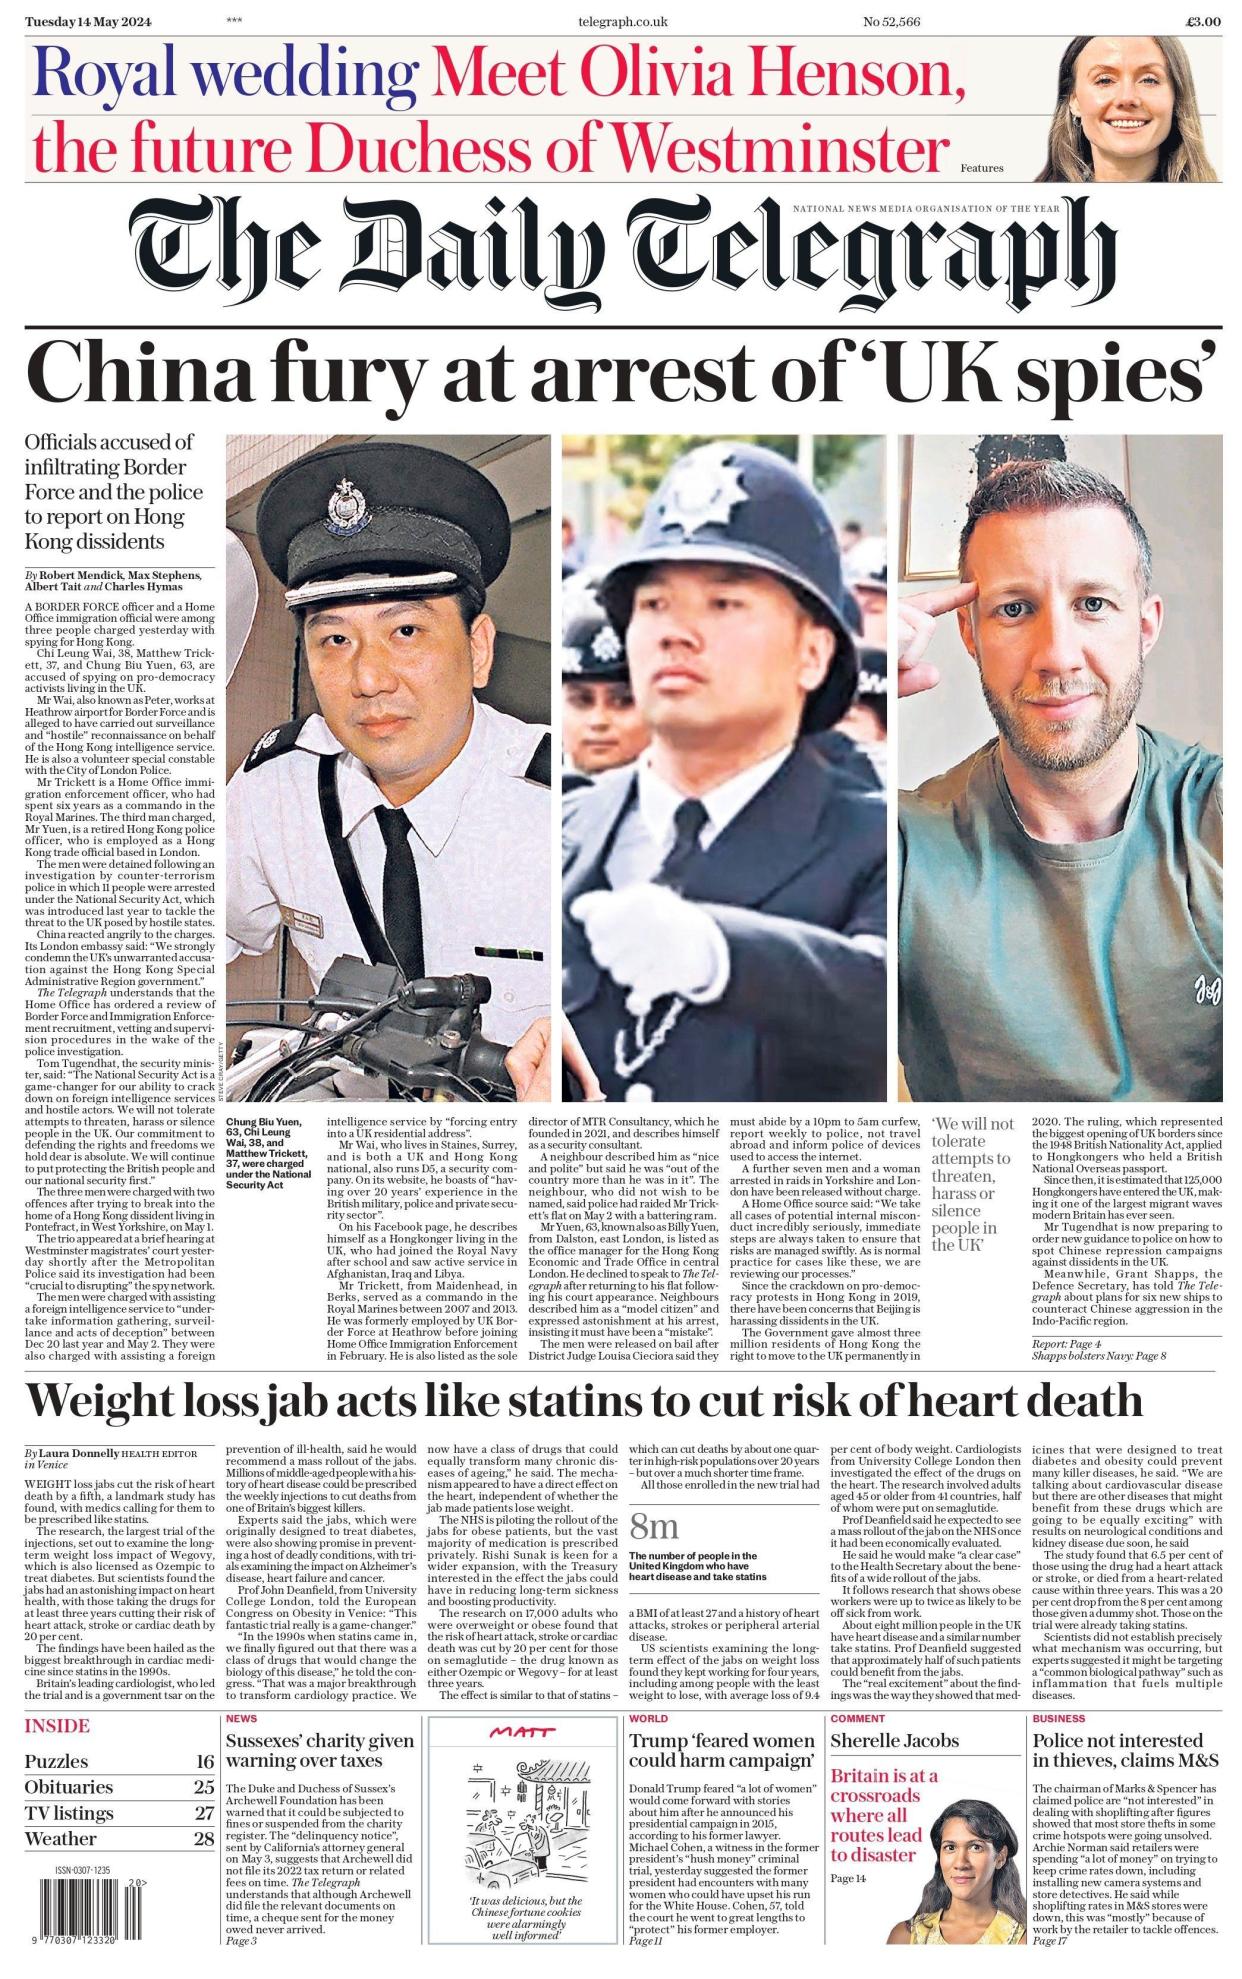 Daily Telegraph: Three charged with aiding Hong Kong intelligence service